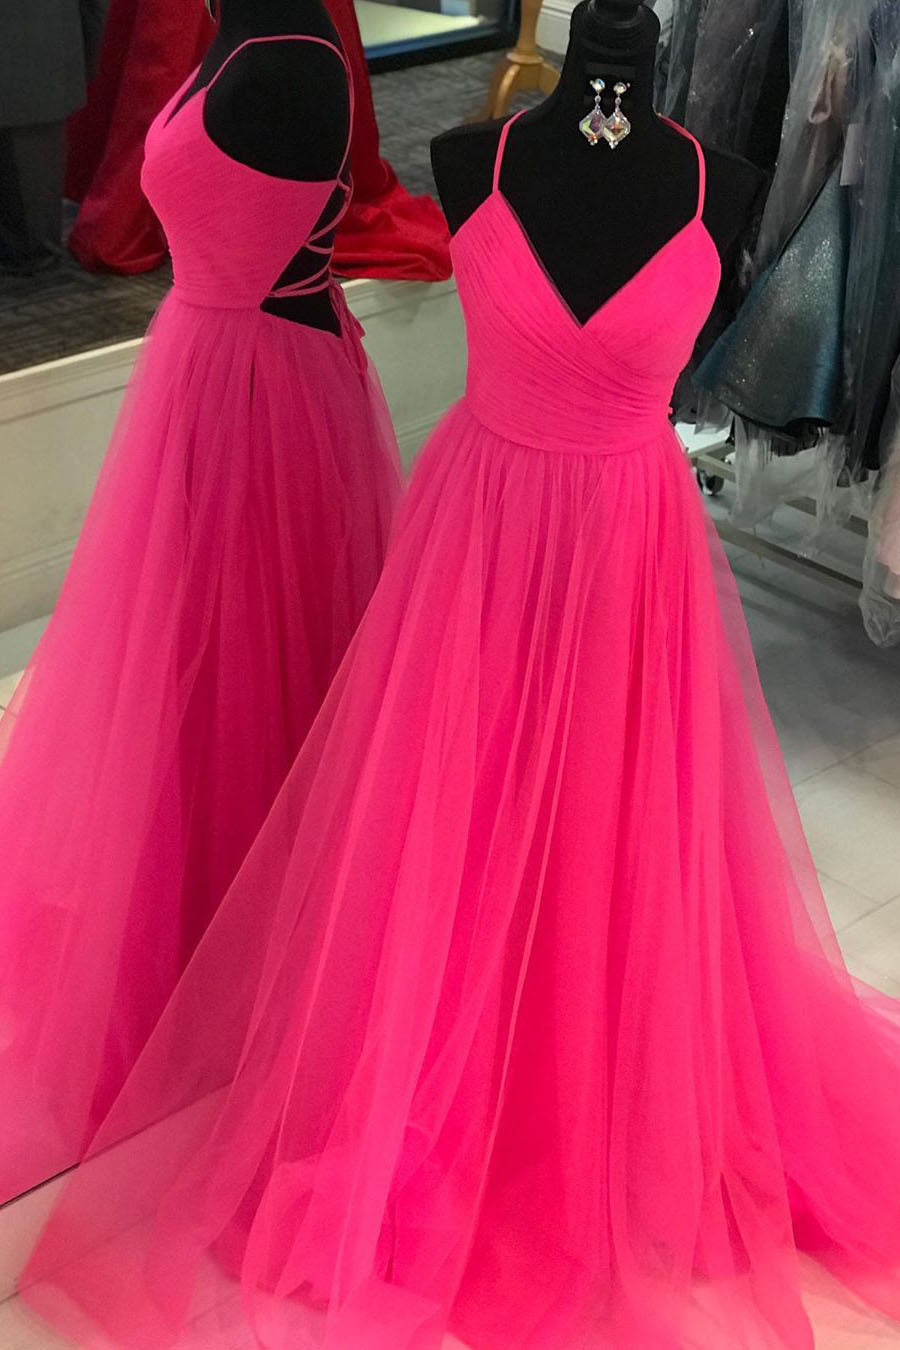 V Neck A-line Hot Pink Long Tulle Prom Graduation Dress Outfits For Women with Lace-up Back